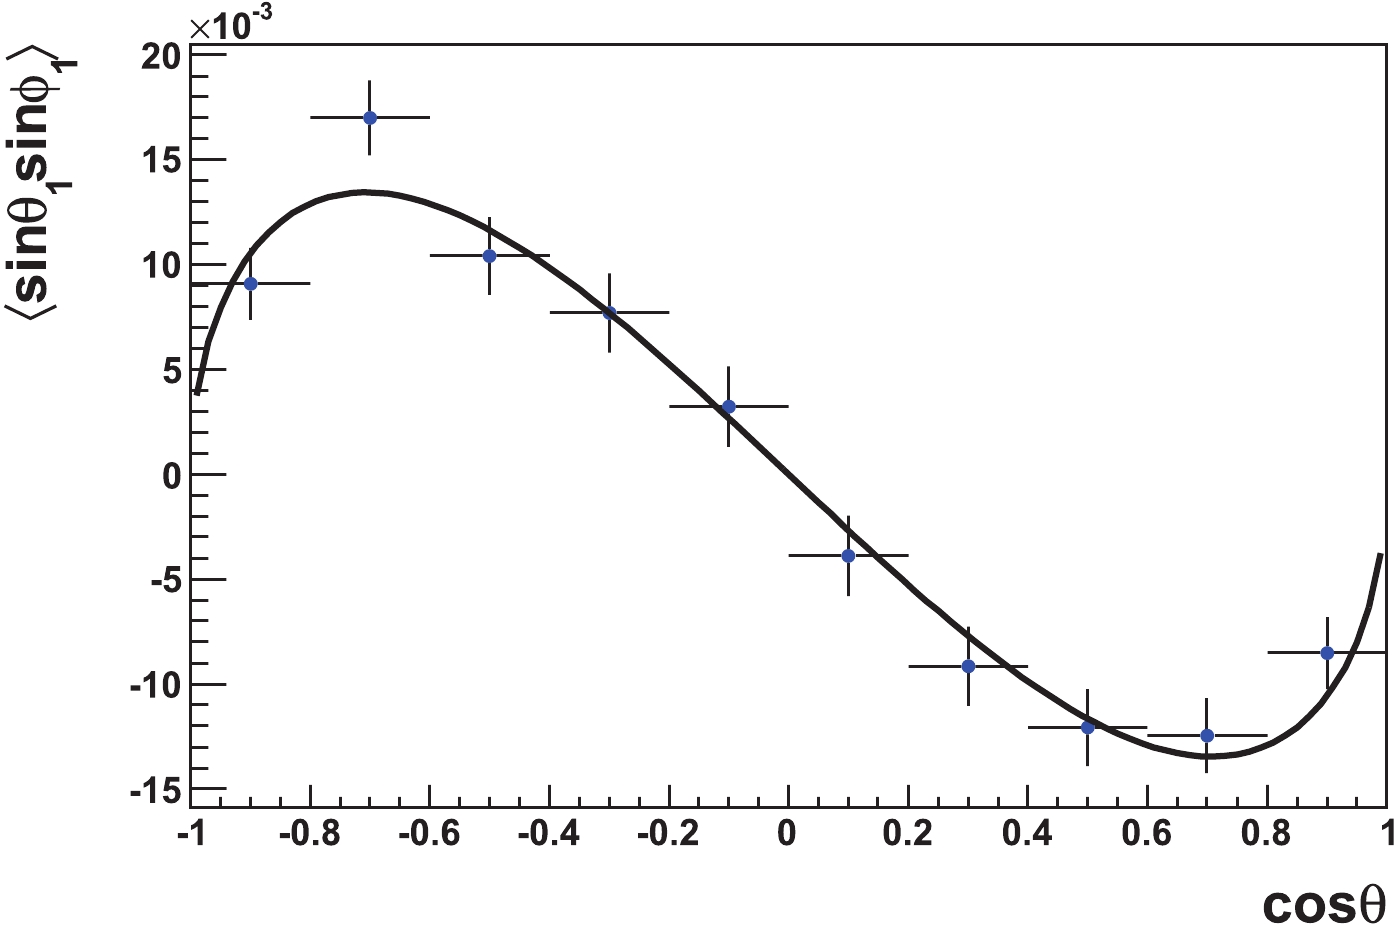 distribution versus . Dots with error bars are filled with 1.0 million MC events, and the curve depicts a comparison with the charmed baryon transverse polarization .